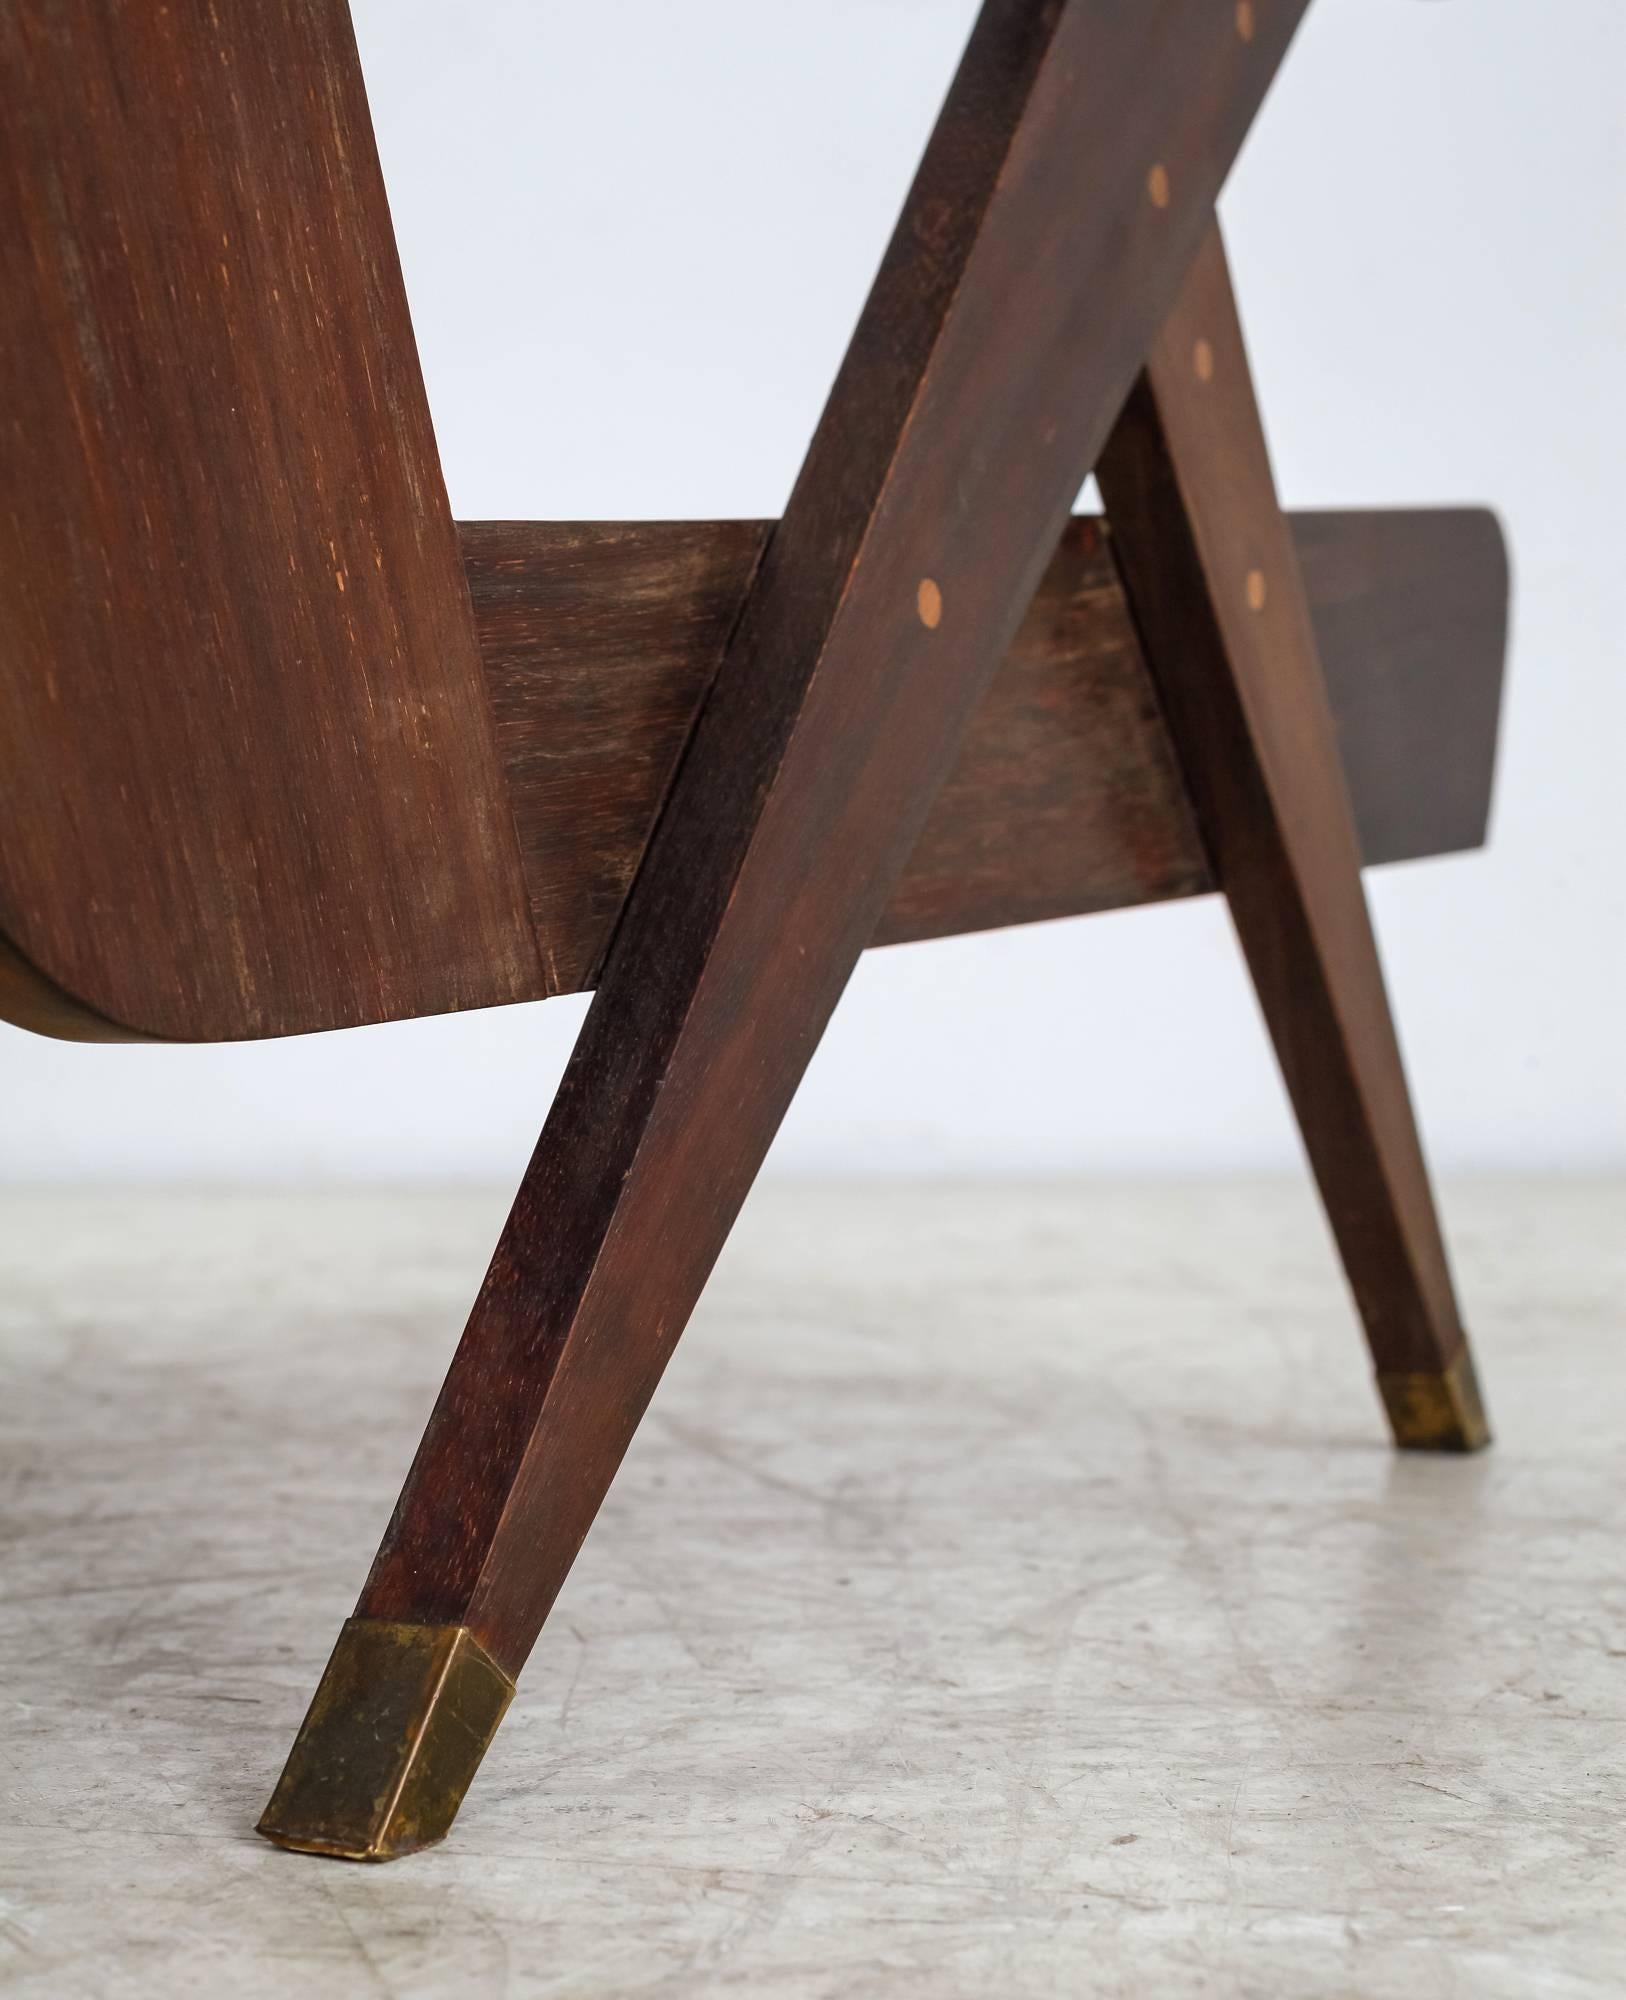 Pair of Modernist French Teak and Cane Chairs, Congo, Unité d’Habitation, 1960s For Sale 1